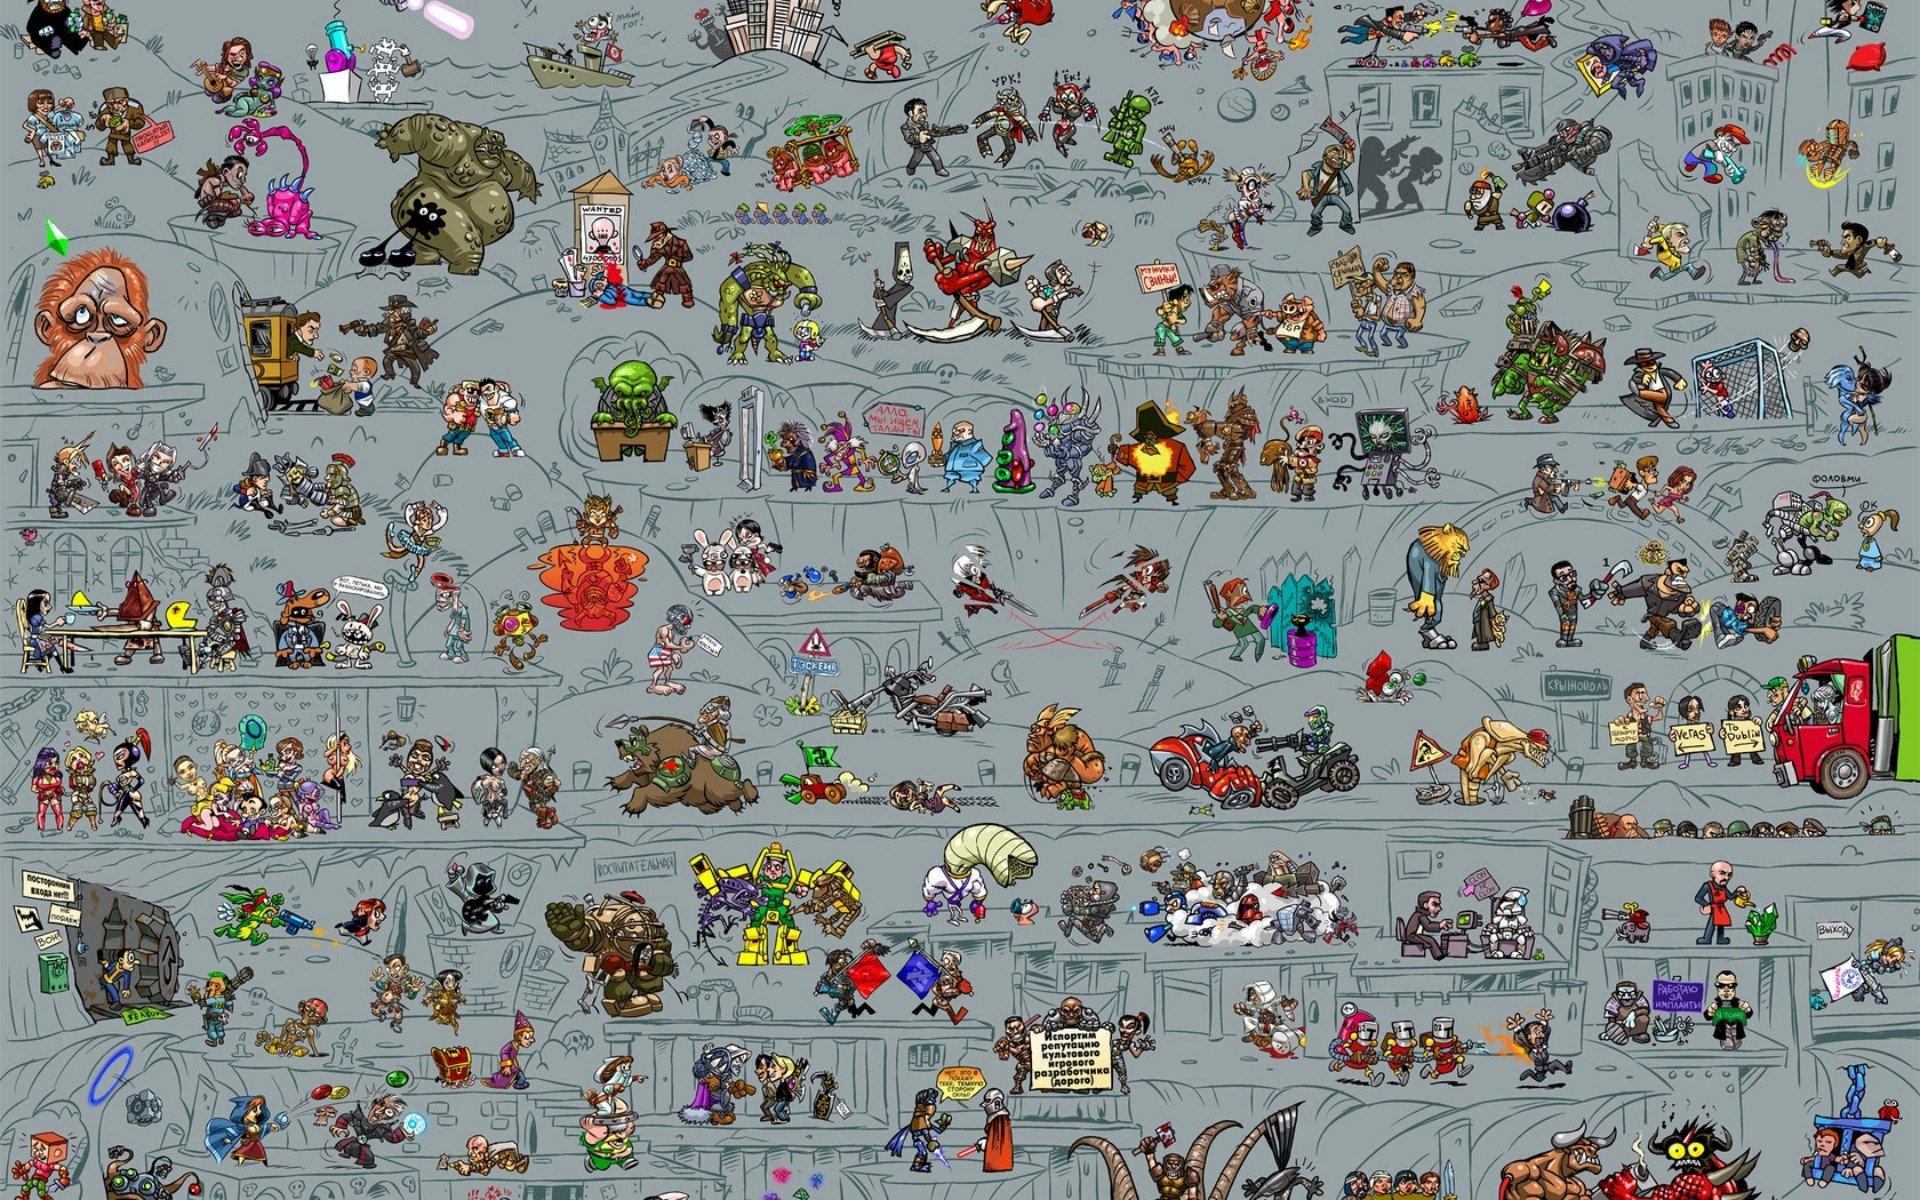 Pyramid Head, Solid Snake, Video games, NIM, Cthulhu, Grim Fandango, Tentacles, Day of the Tentacle, Fallout, Companion Cube, Portal (game), Pac Man, Silent Hill, The Sims, Space Invaders, Bomberman Wallpaper